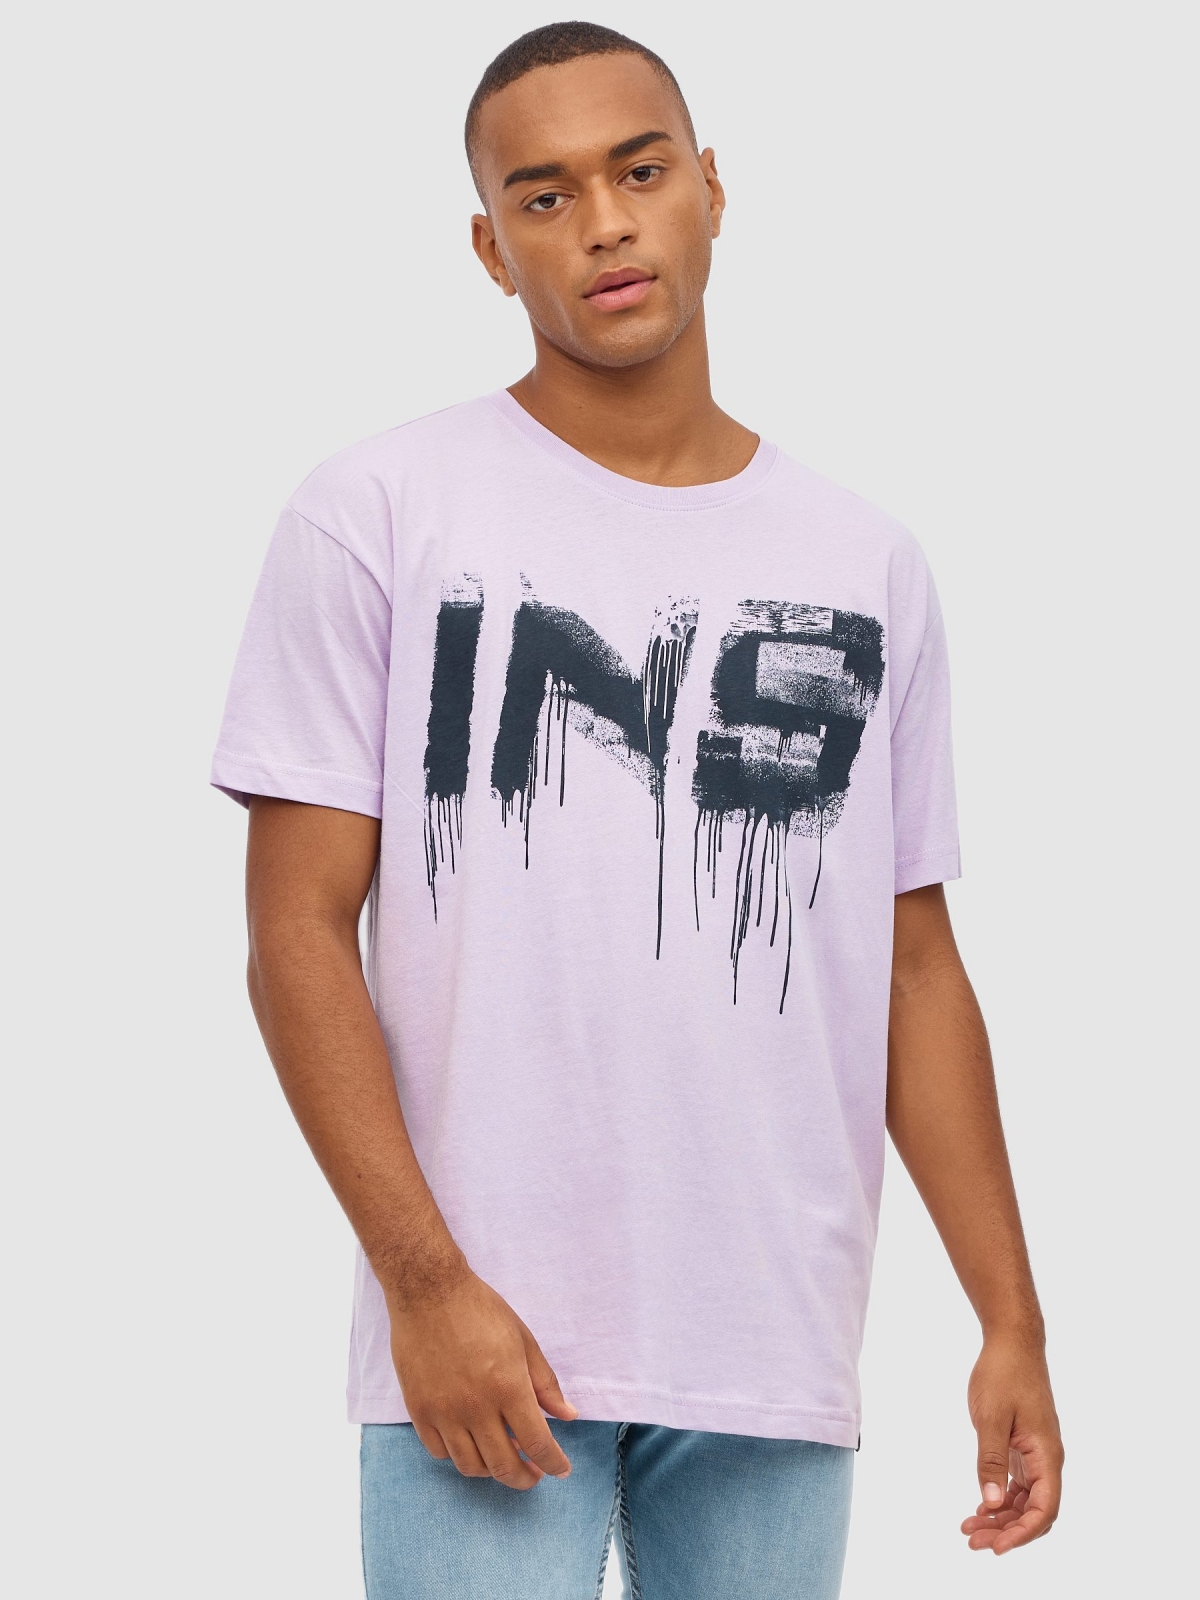 INSIDE spray T-shirt purple middle front view